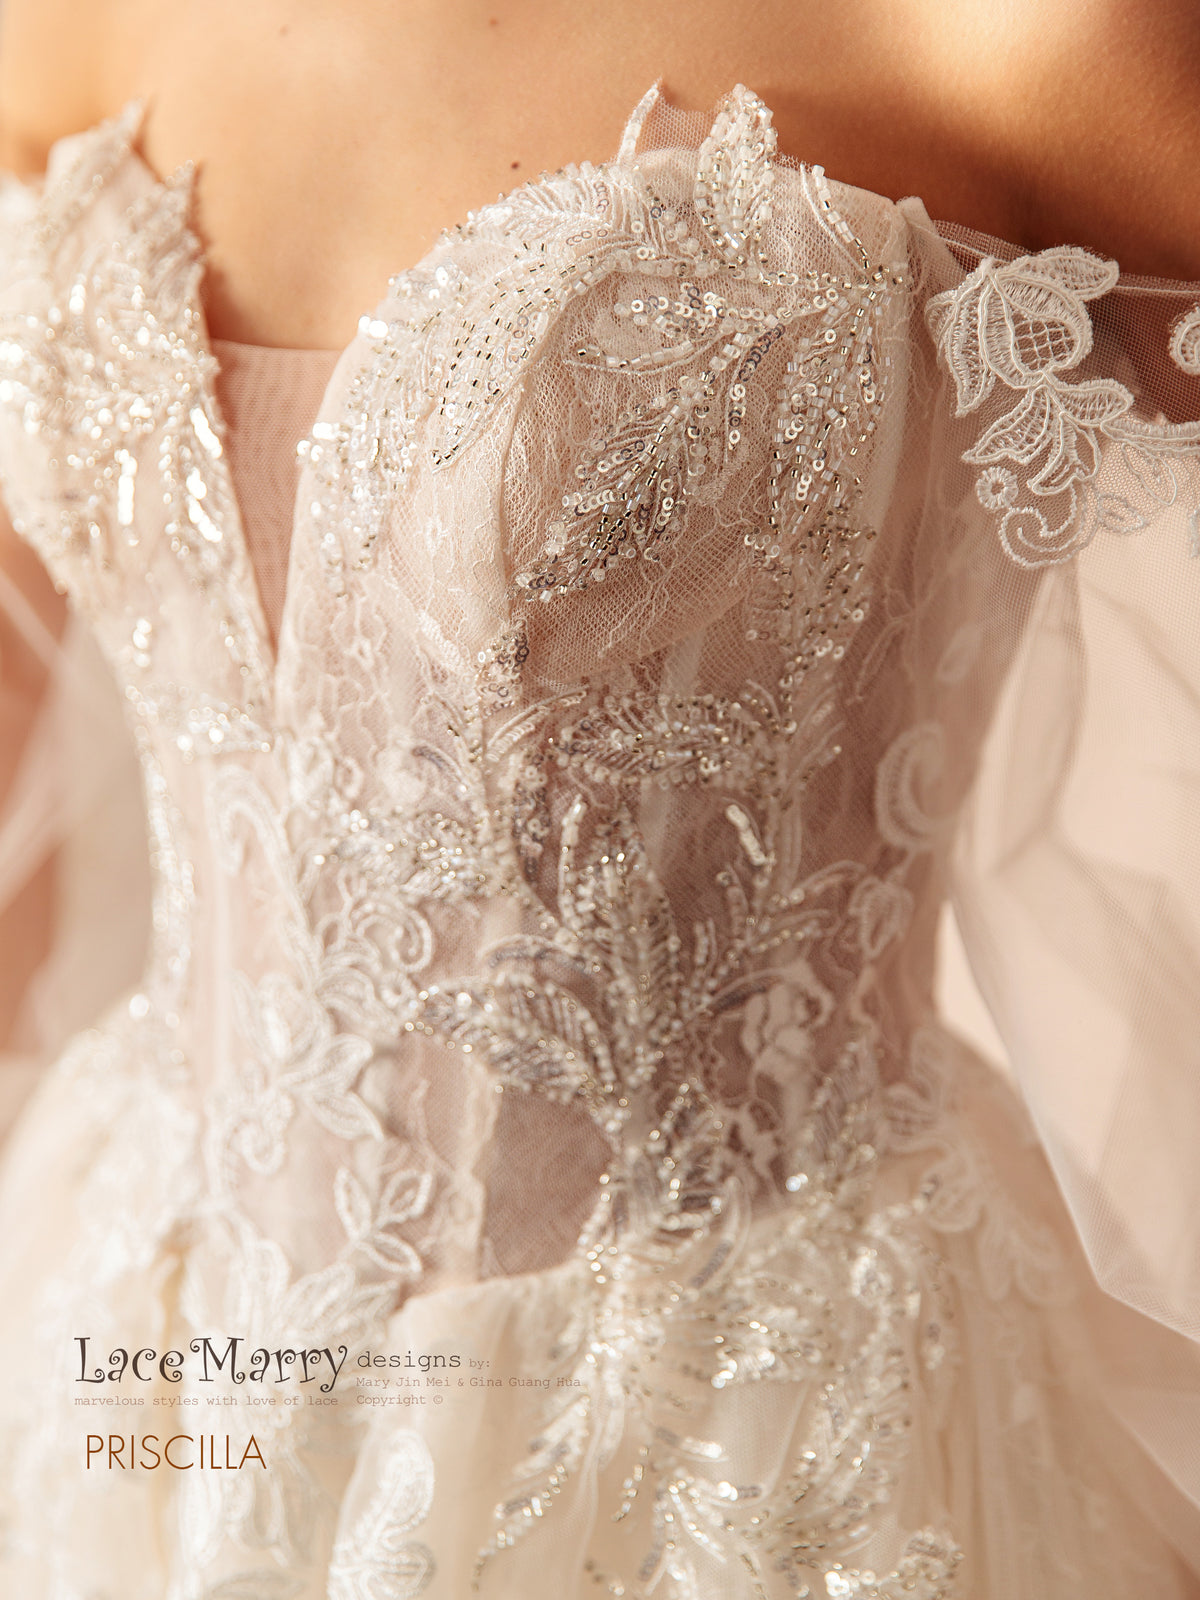 PRISCILLA / Breathtaking Wedding Dress With Puff Long Sleeves